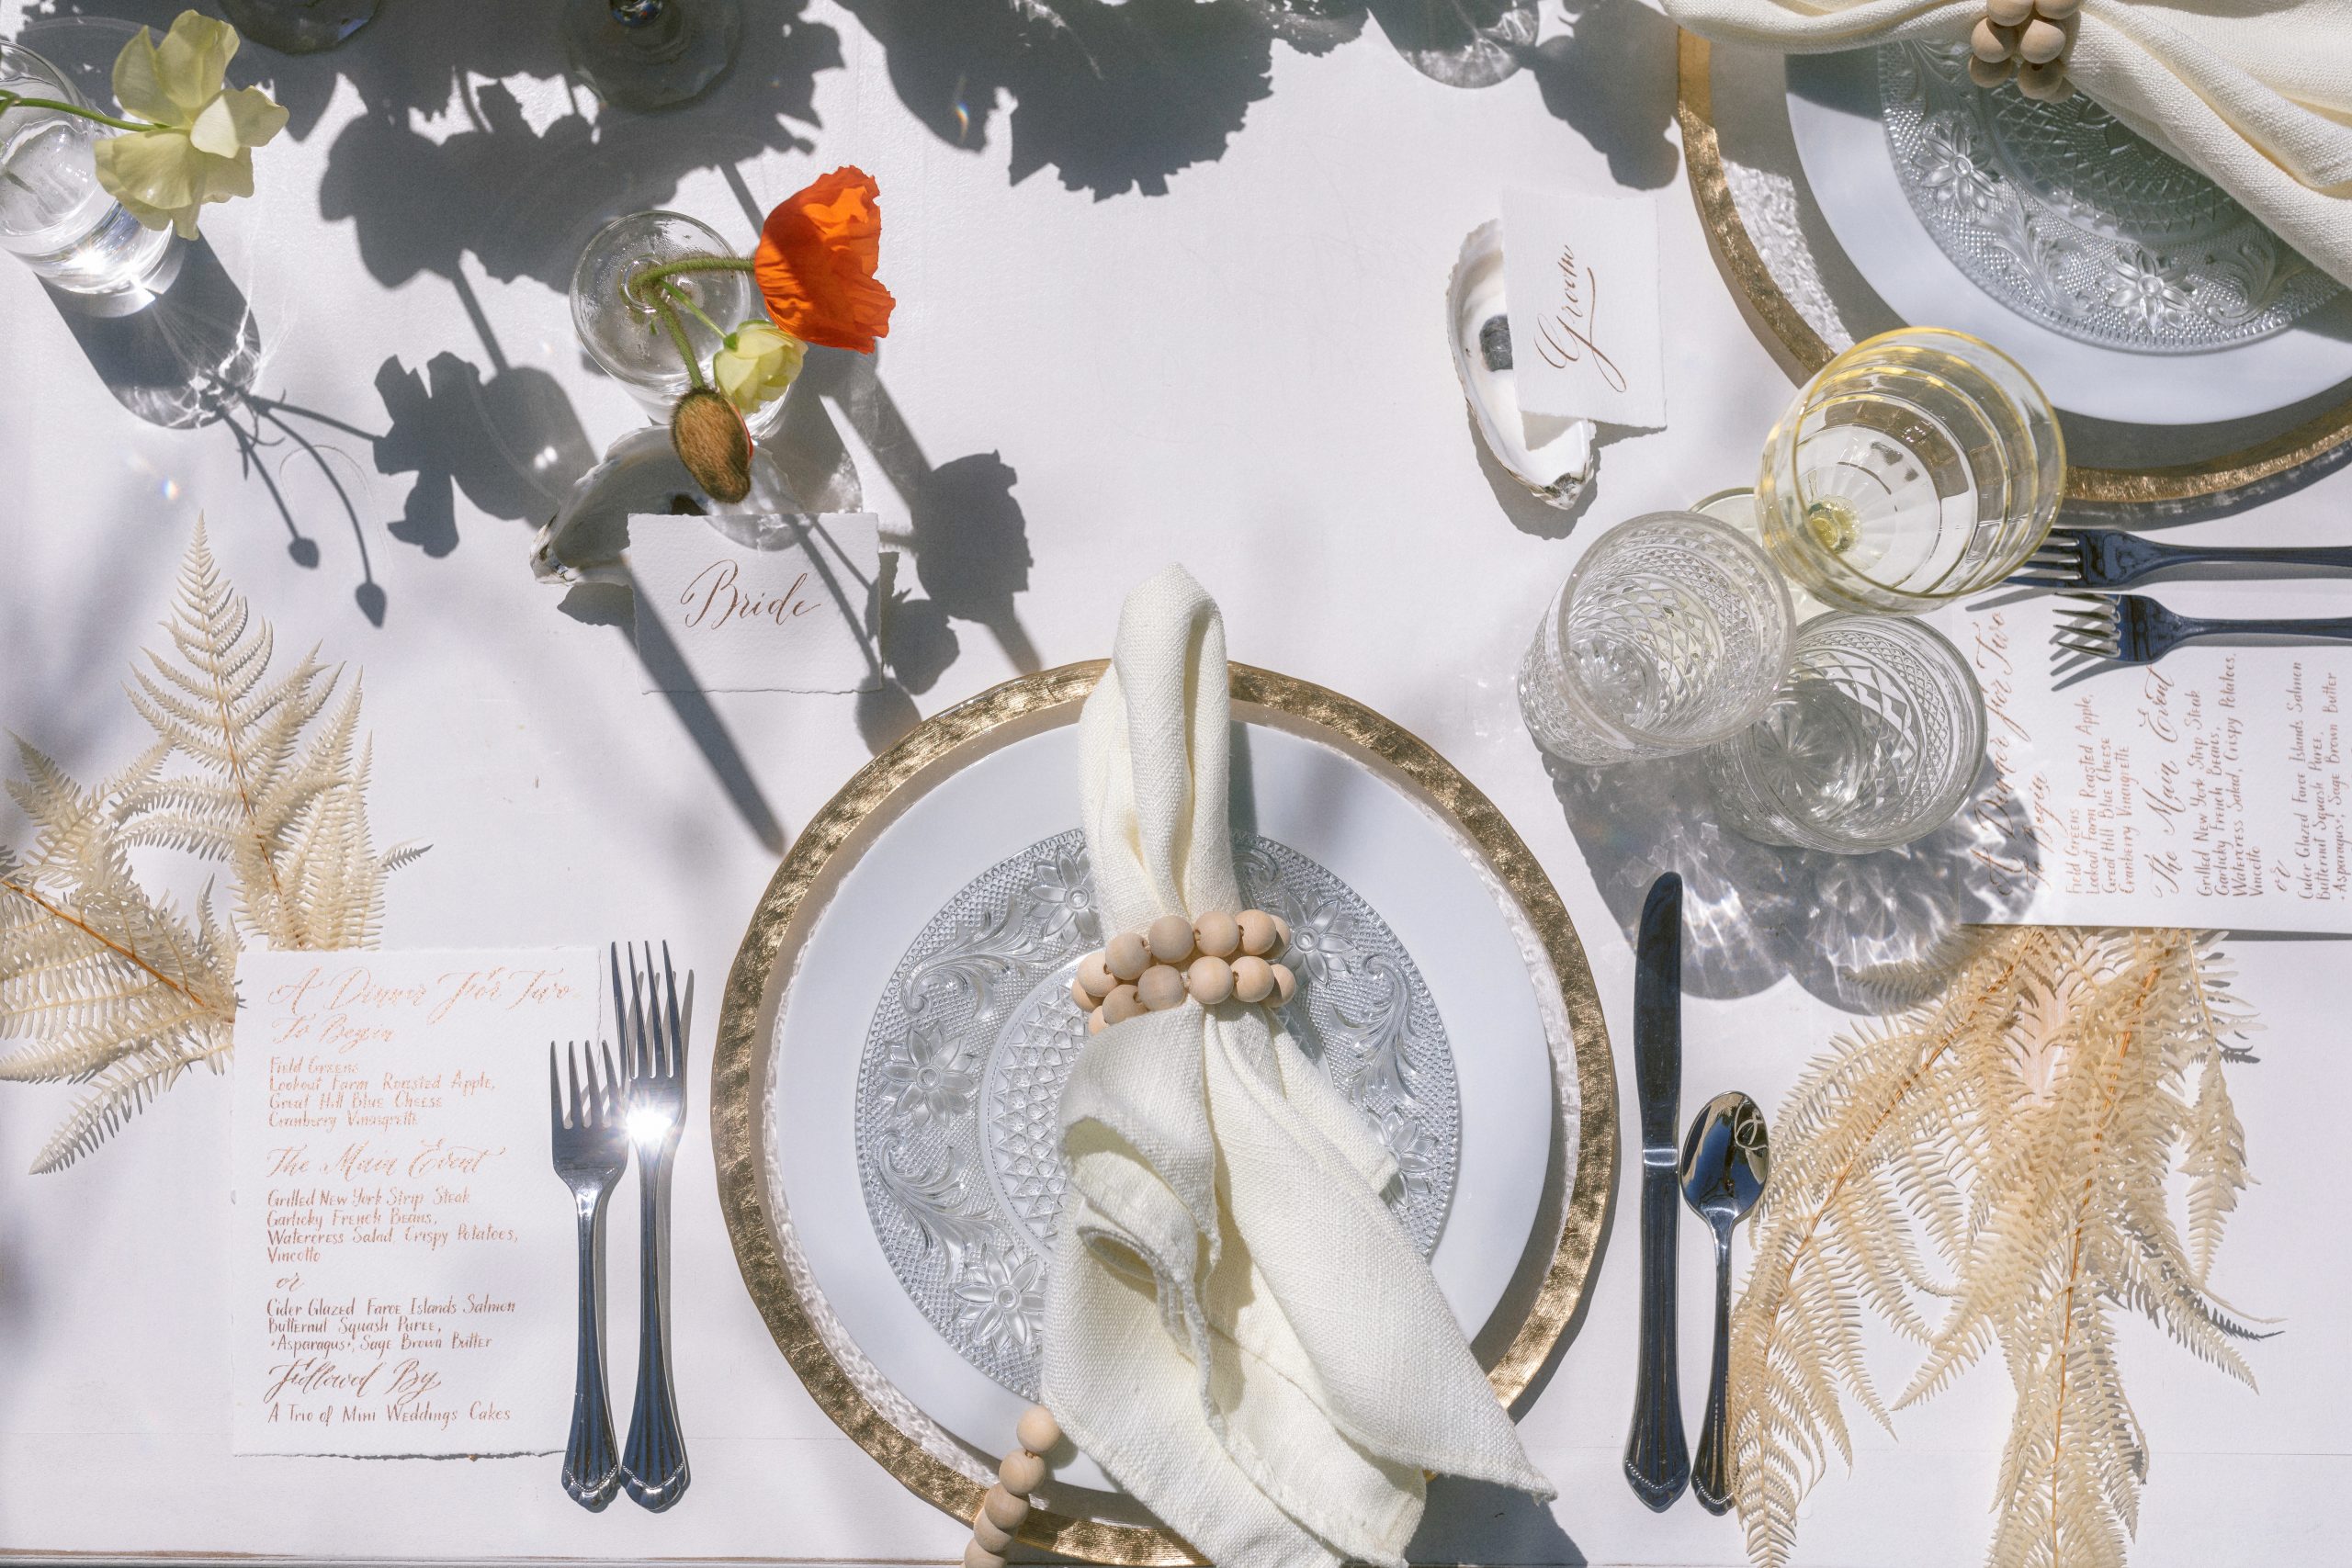 An ornate white table setting with florals and beads around a napkin